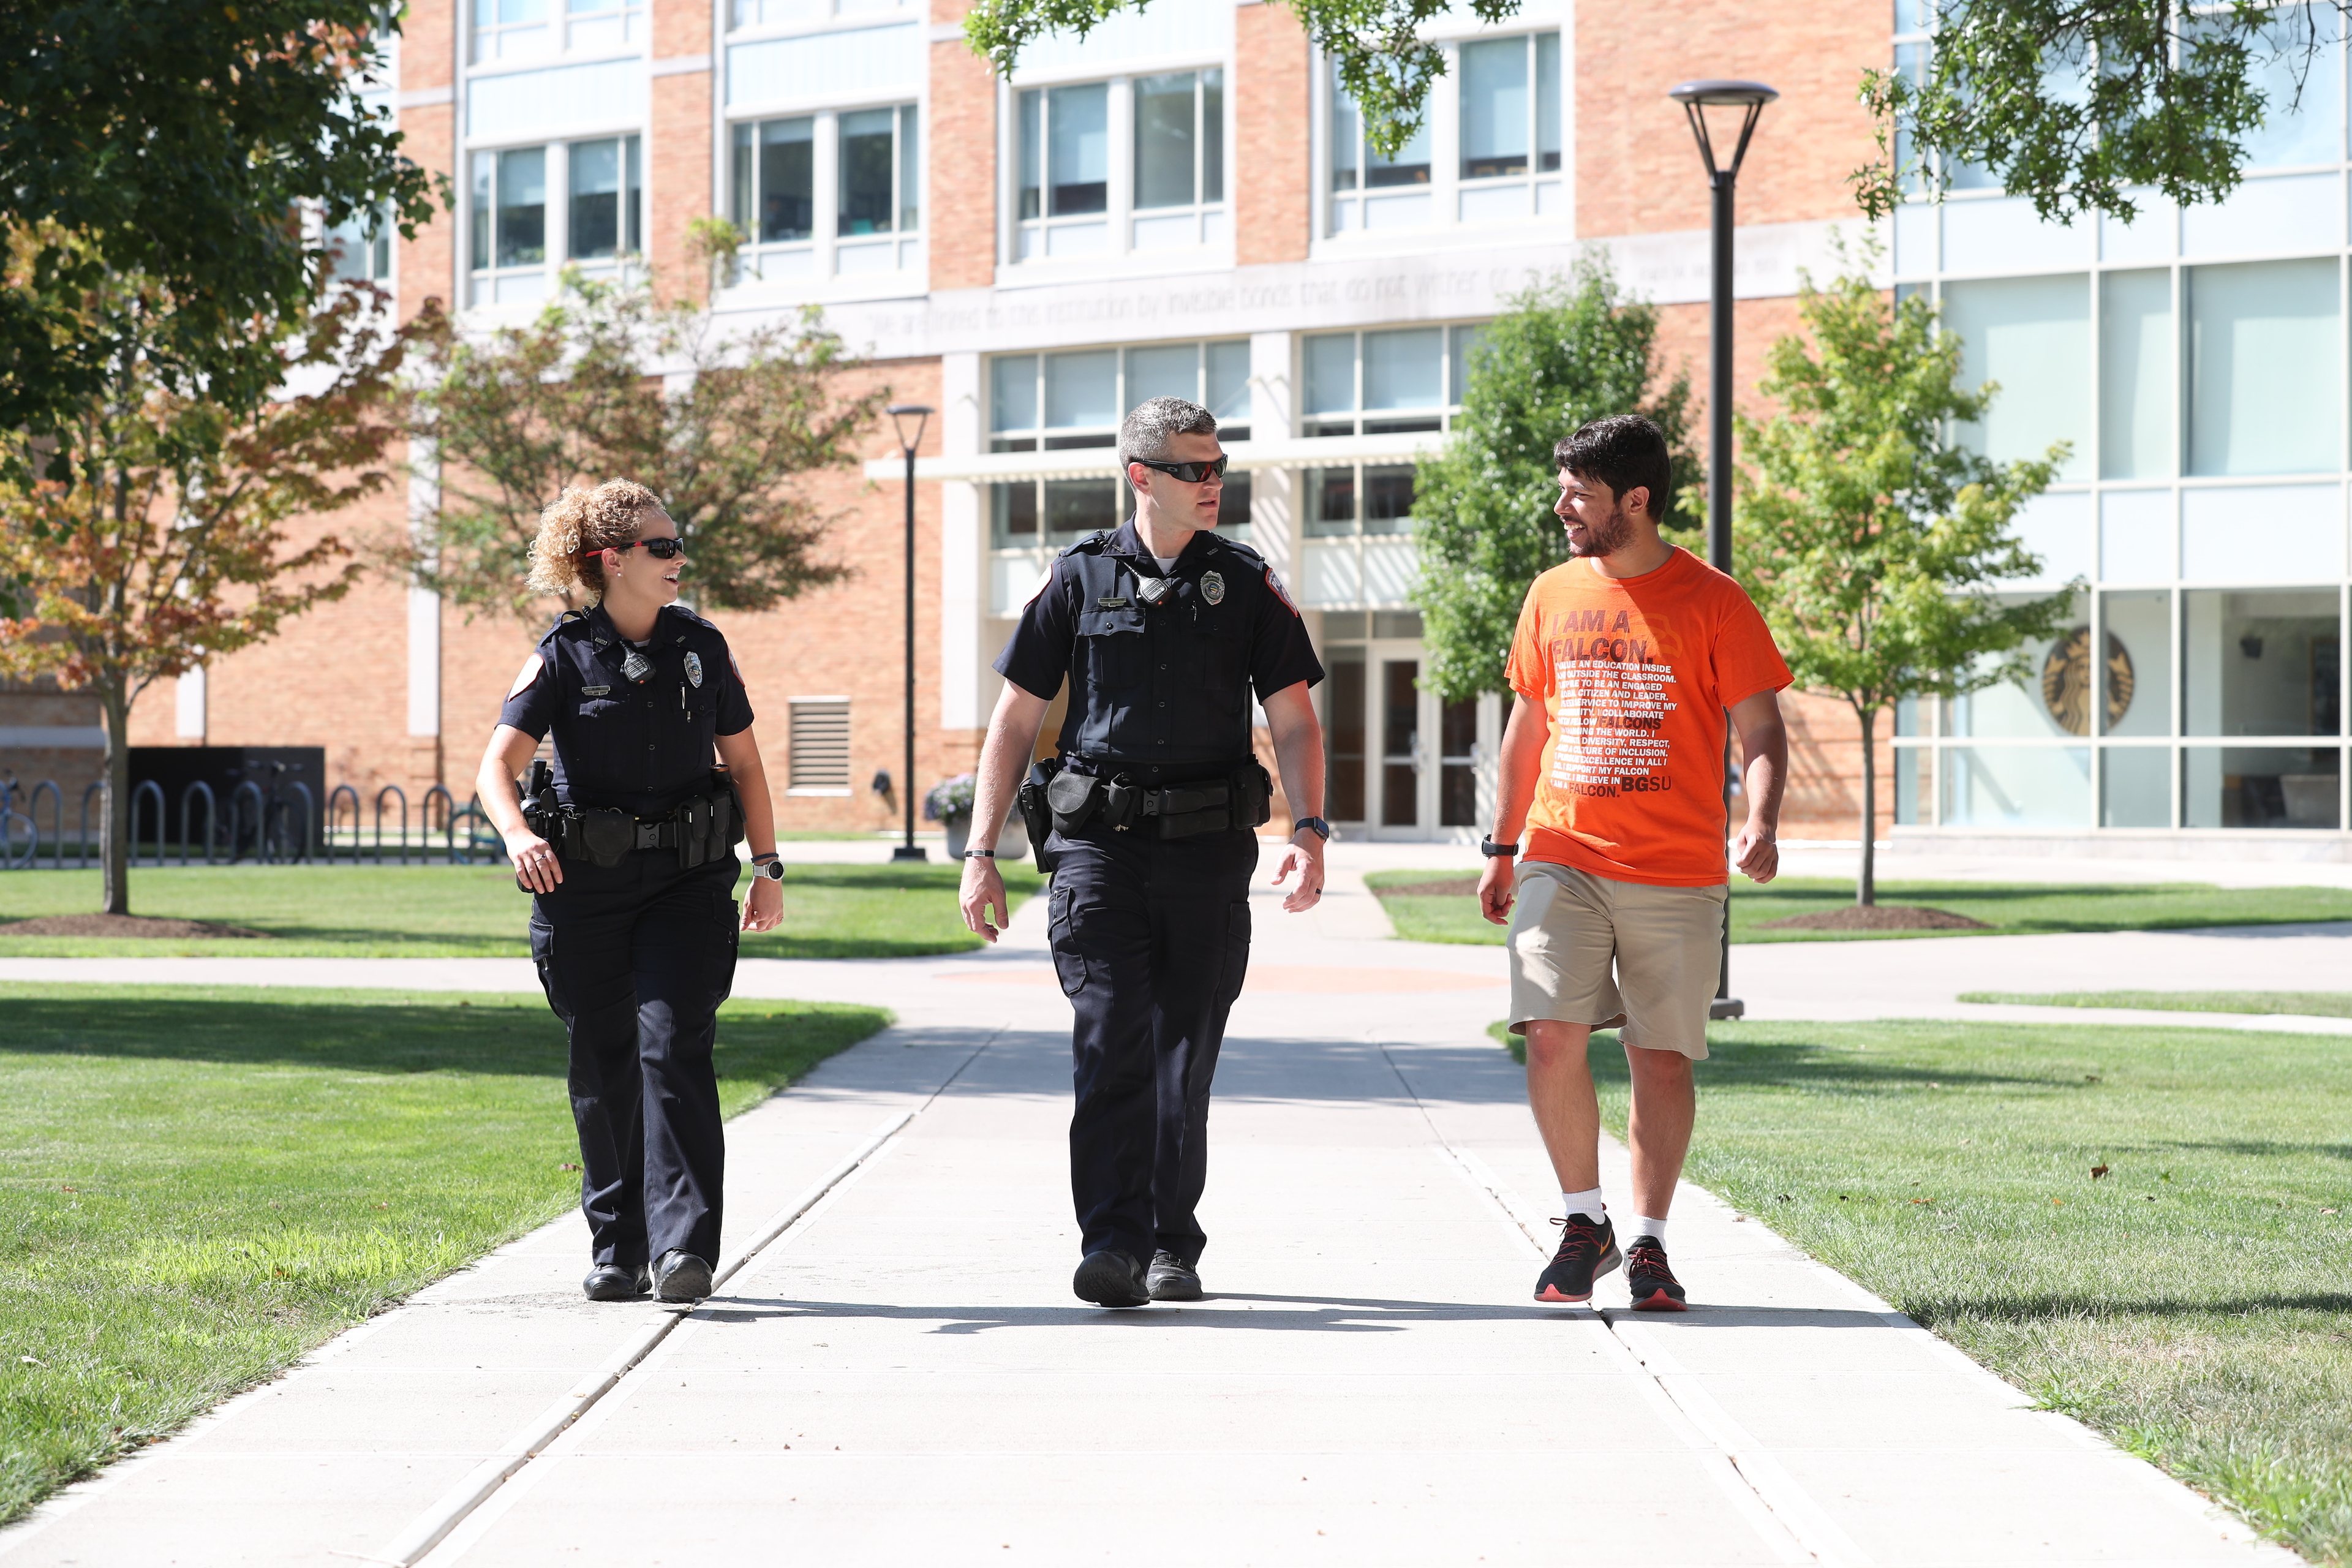 cops-and-student-walking-together-on-campus-